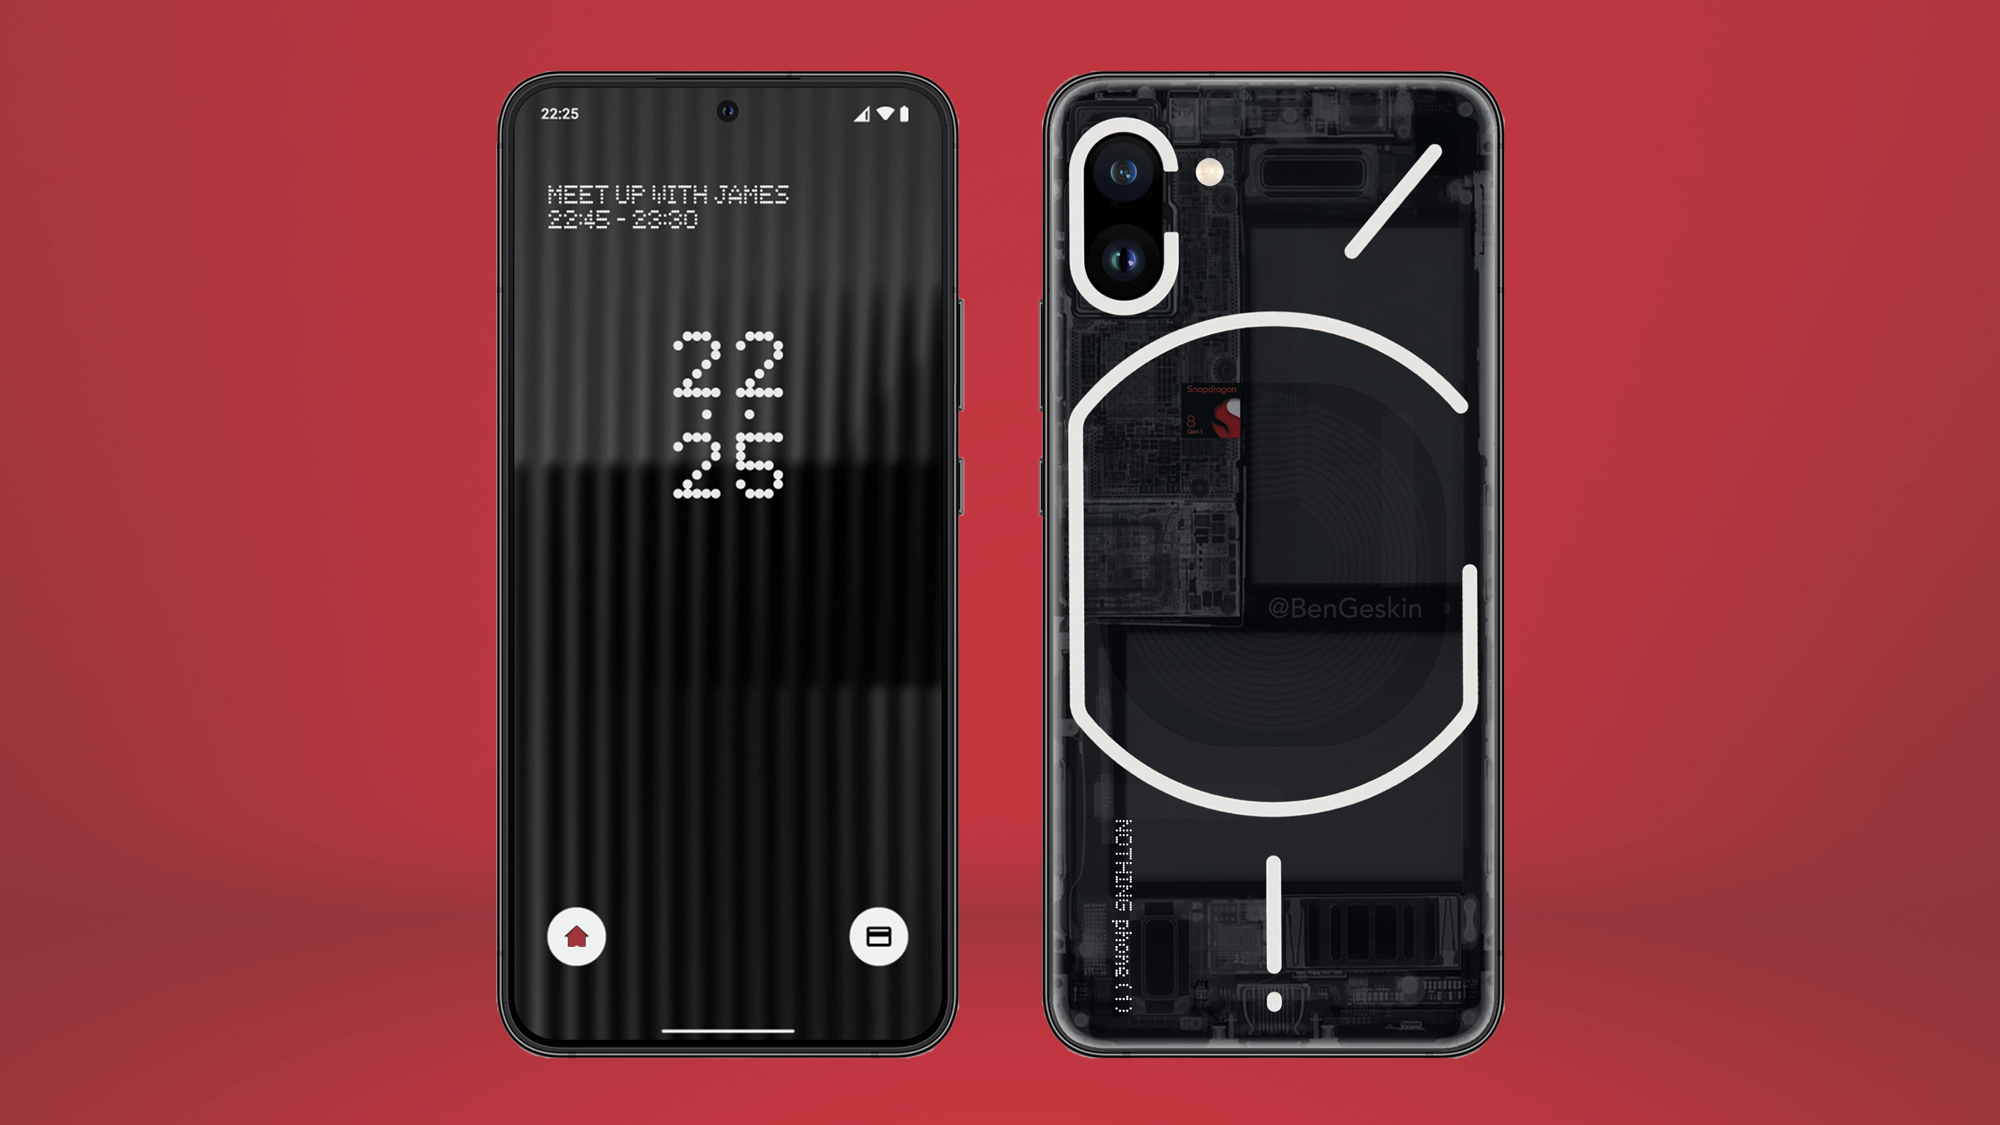 An unofficial render of the Nothing Phone 1, using an official screenshot of the display, on a red background